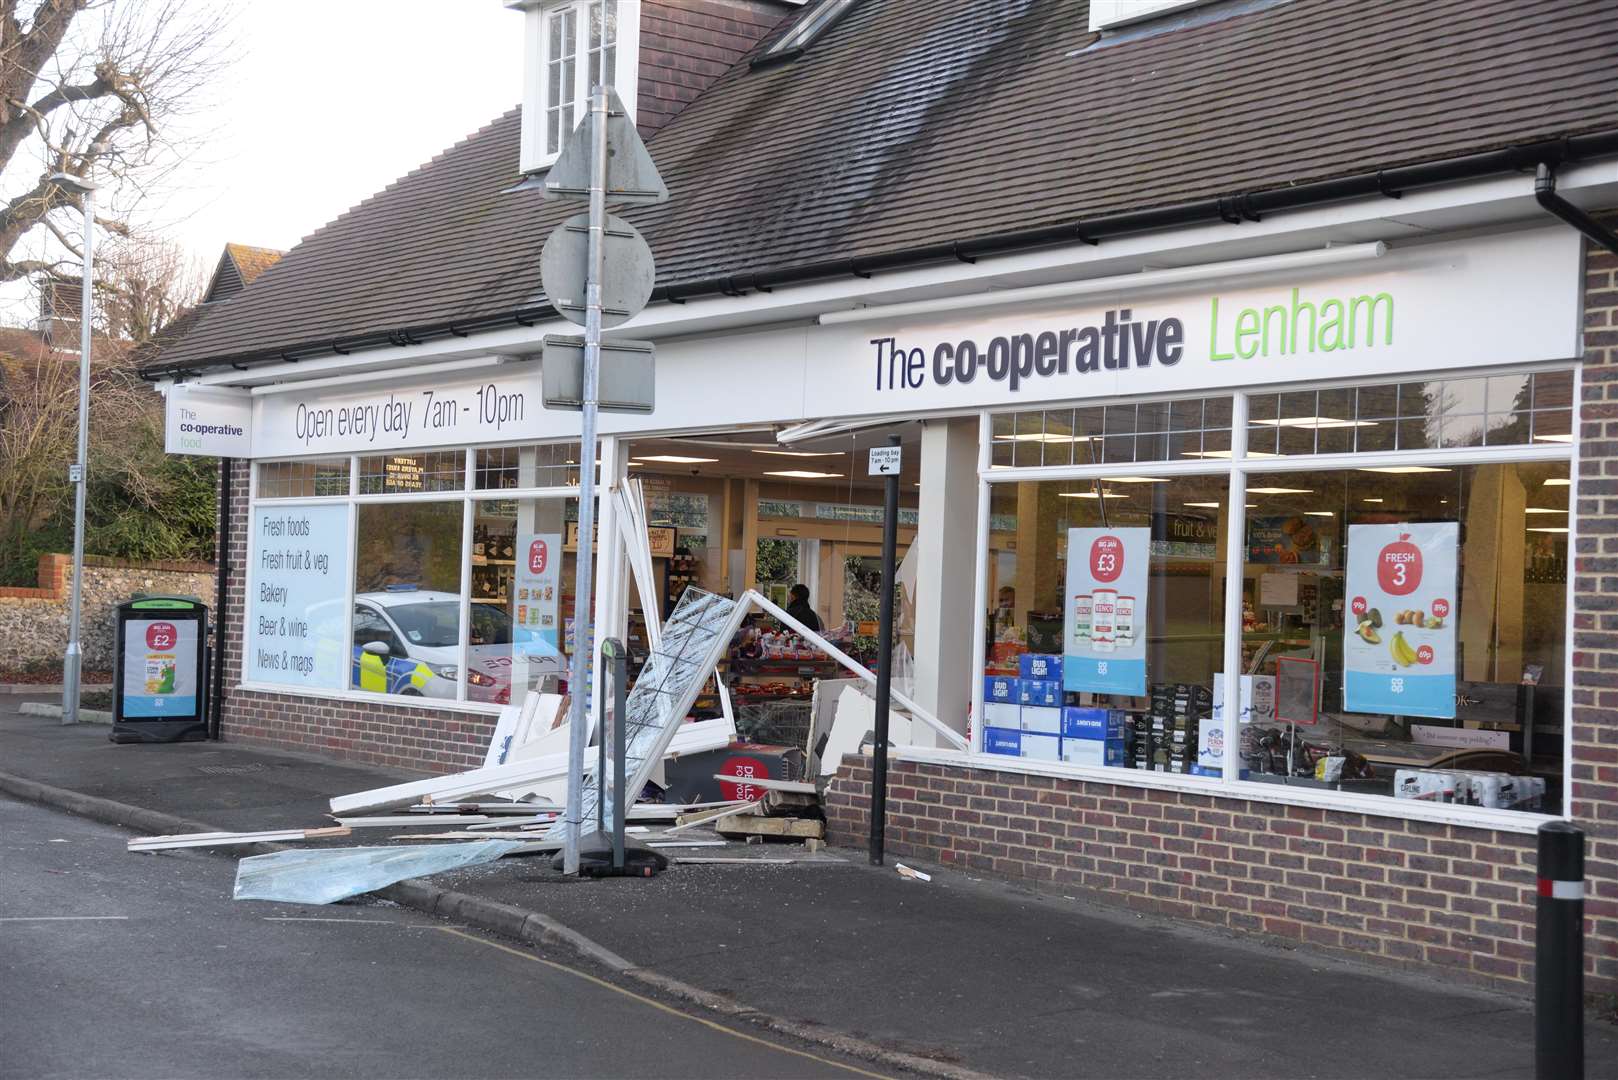 The scene at the Lenham Coop on Wednesday. Picture: Chris Davey. (6421563)